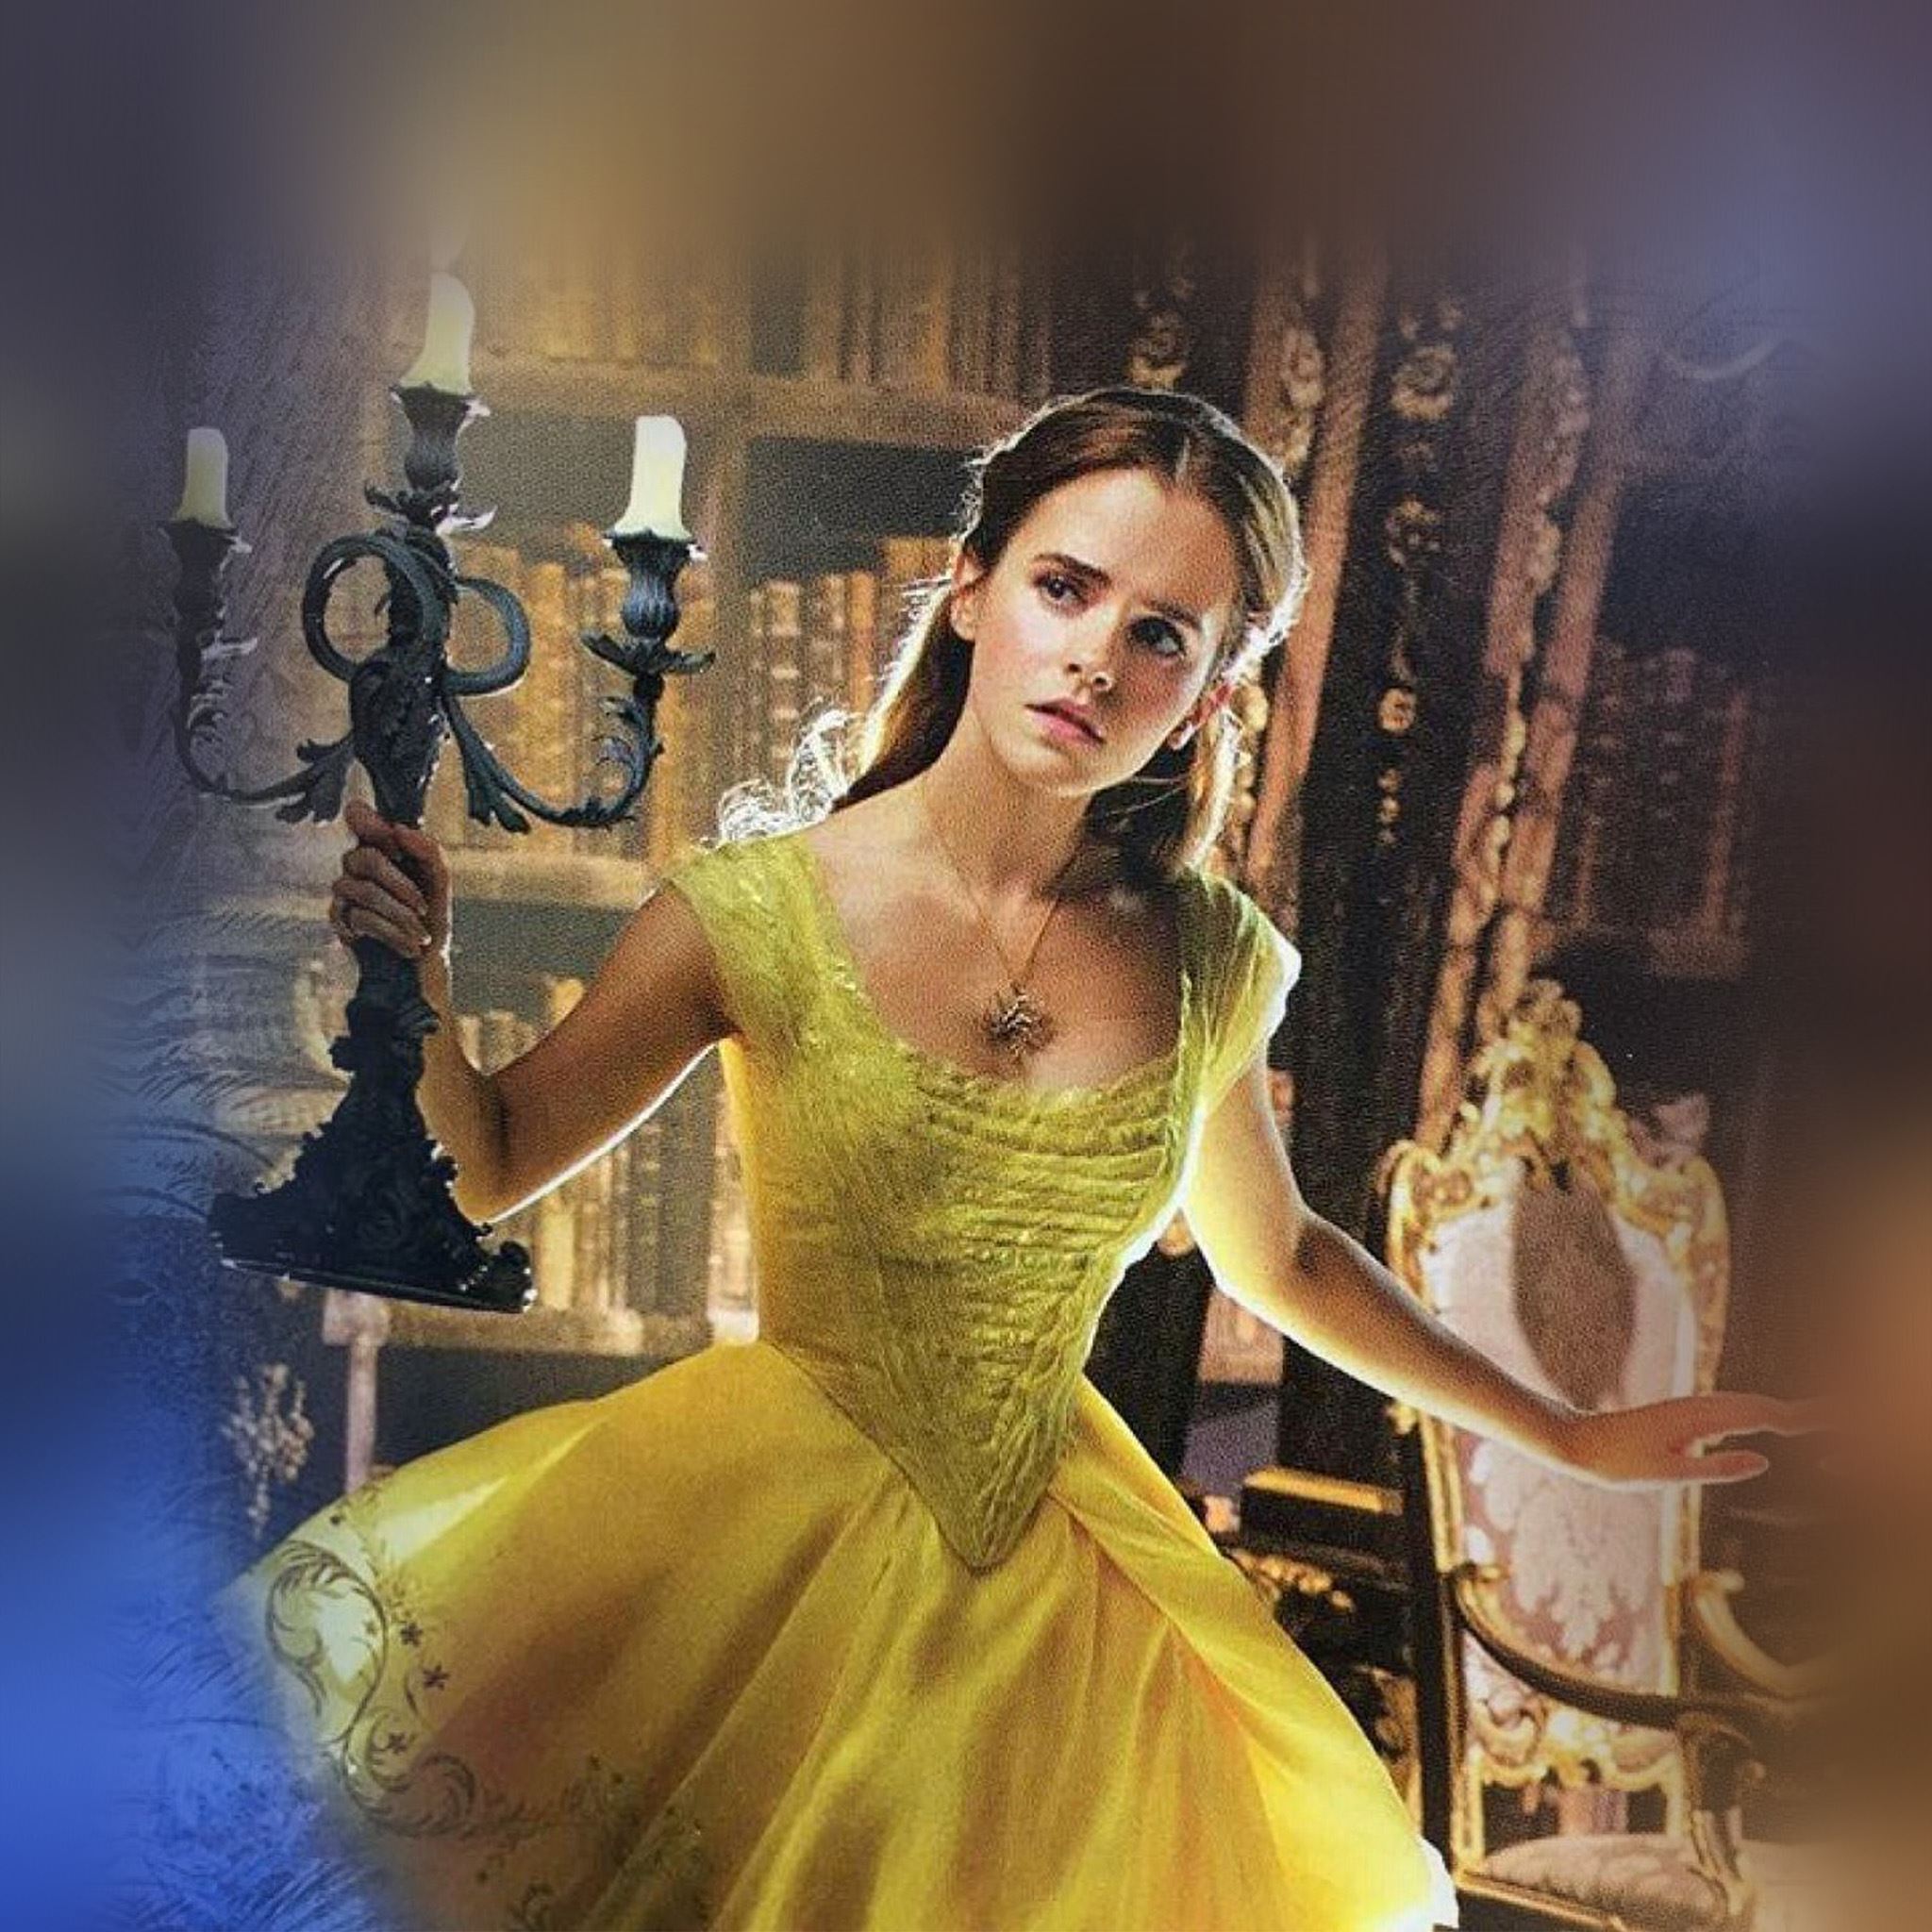 Beauty And The Beast (2012) Wallpapers